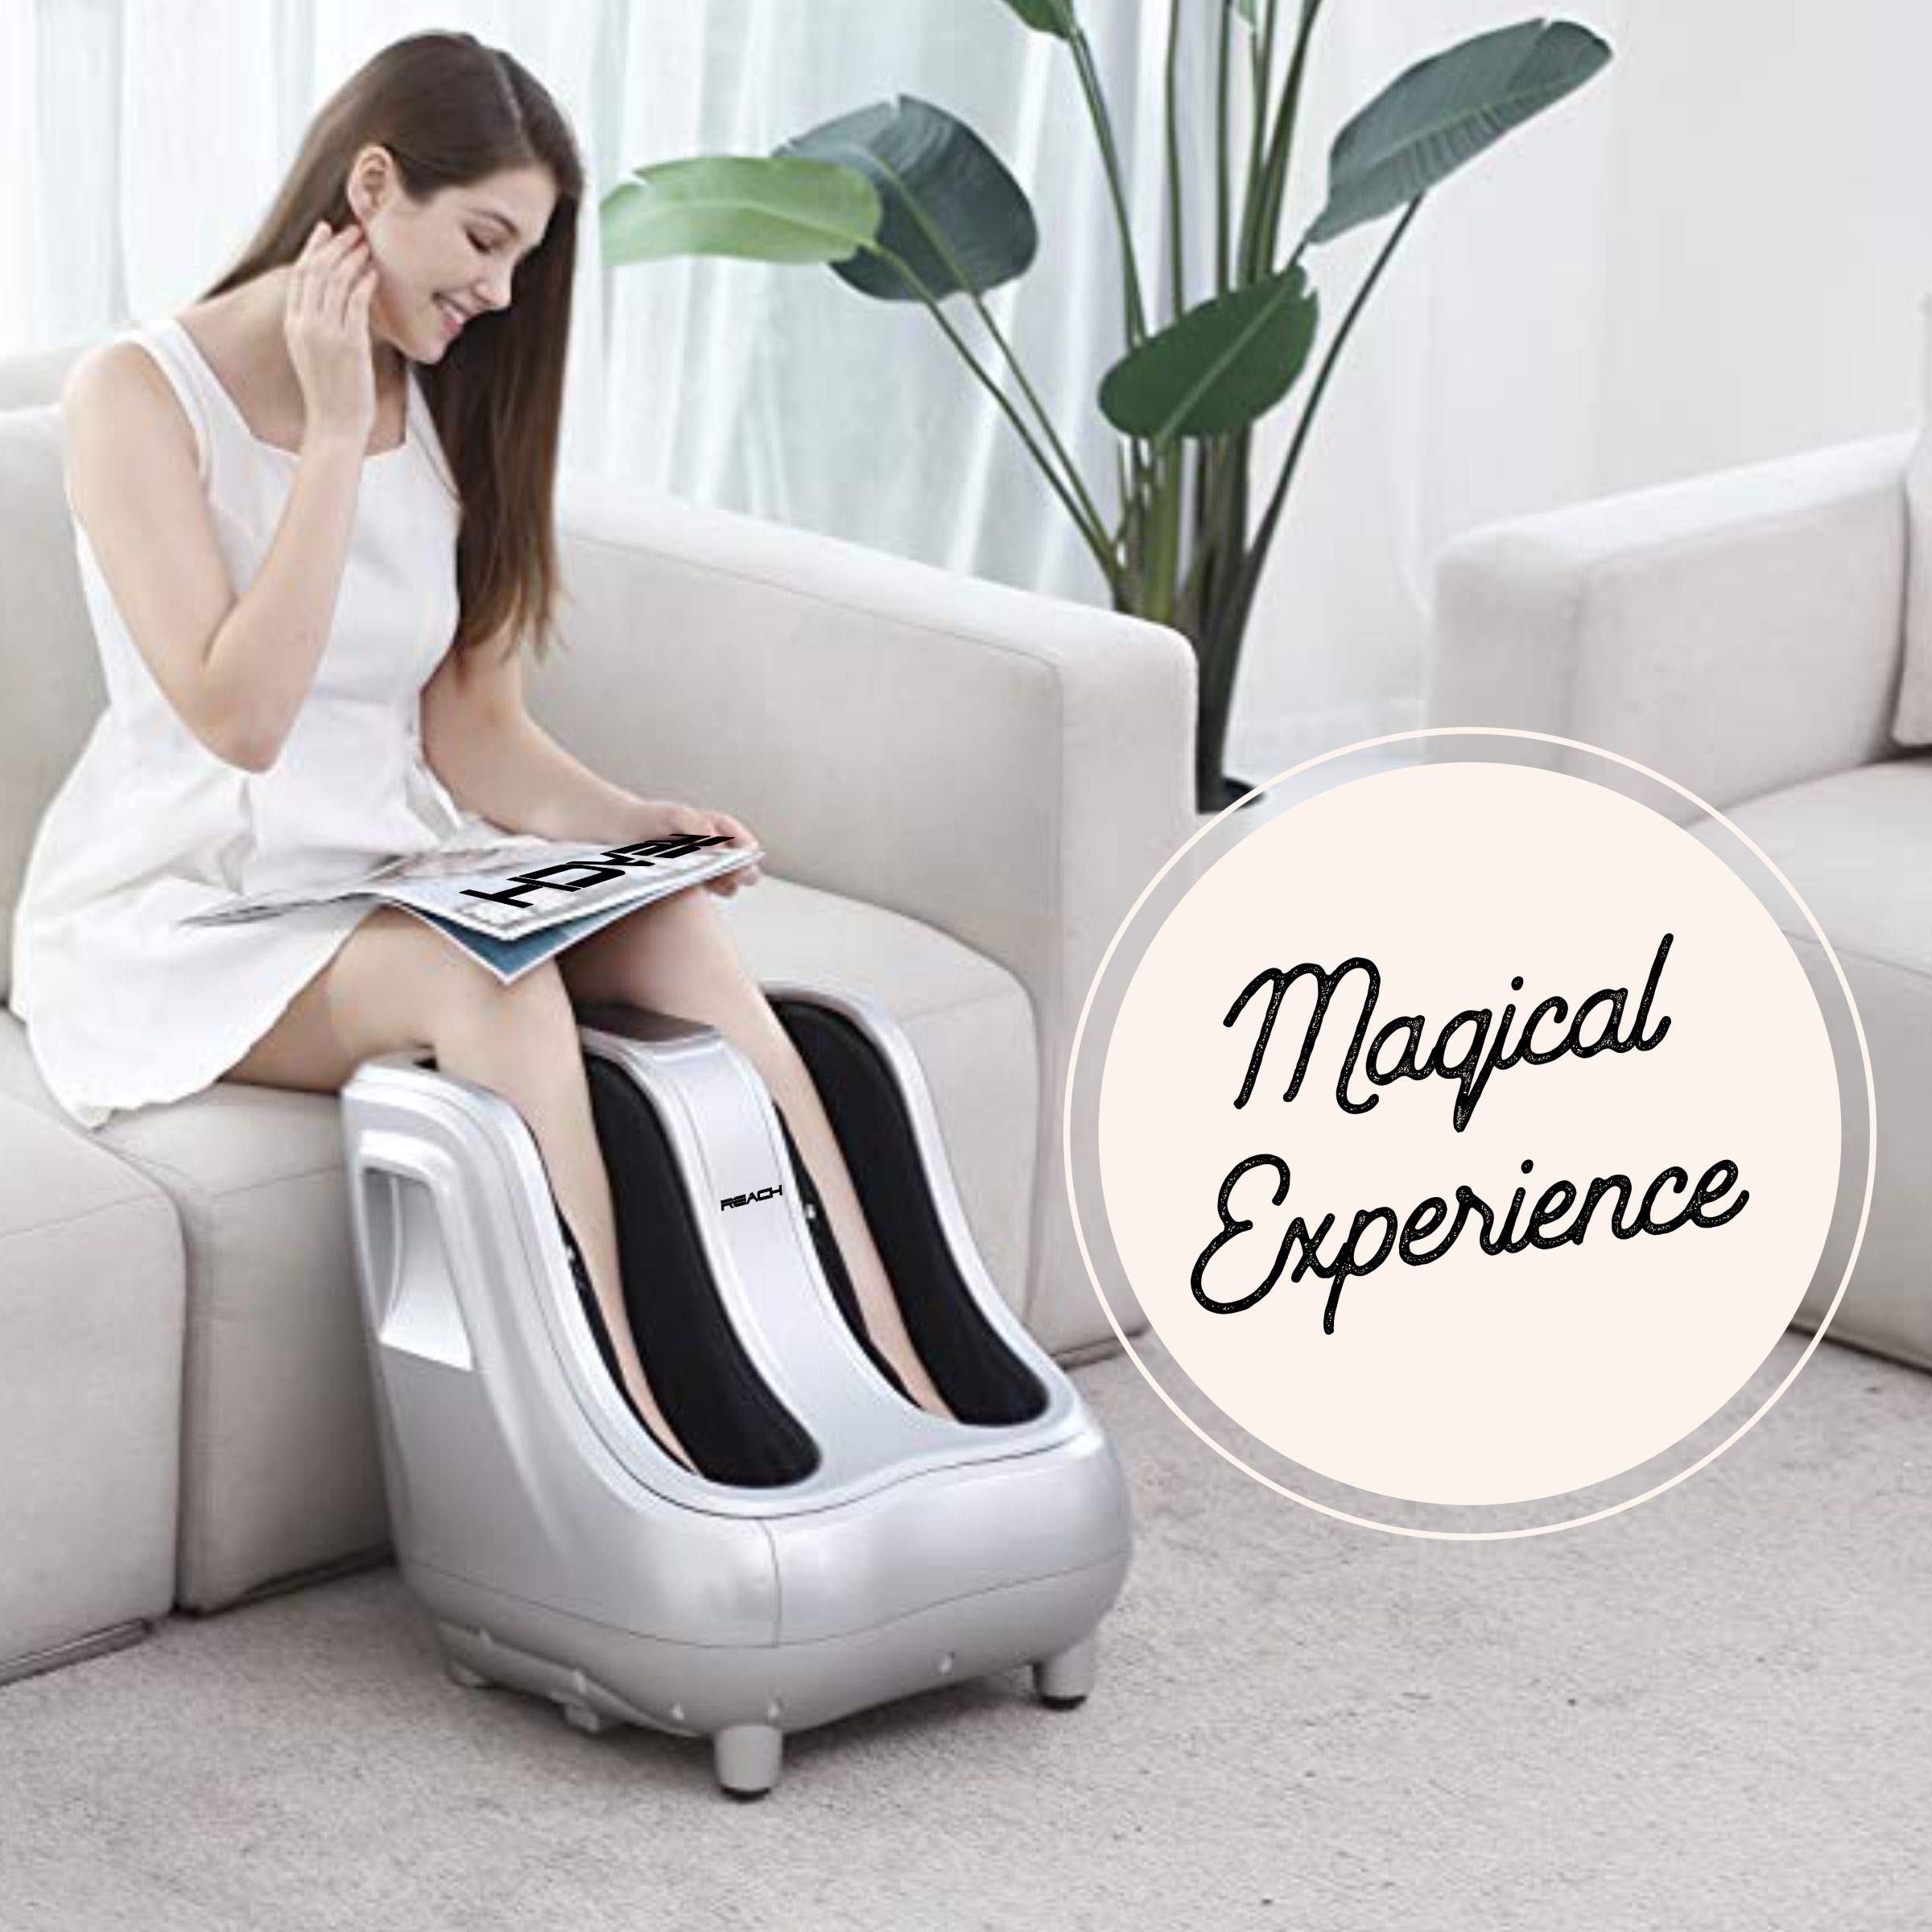 Reach Bliss Electric Foot Leg Calf Massager With Shiatsu, Acupoint,vibration & Reflexology Massage Machine For Pain Relief Relaxation at Home and Office.